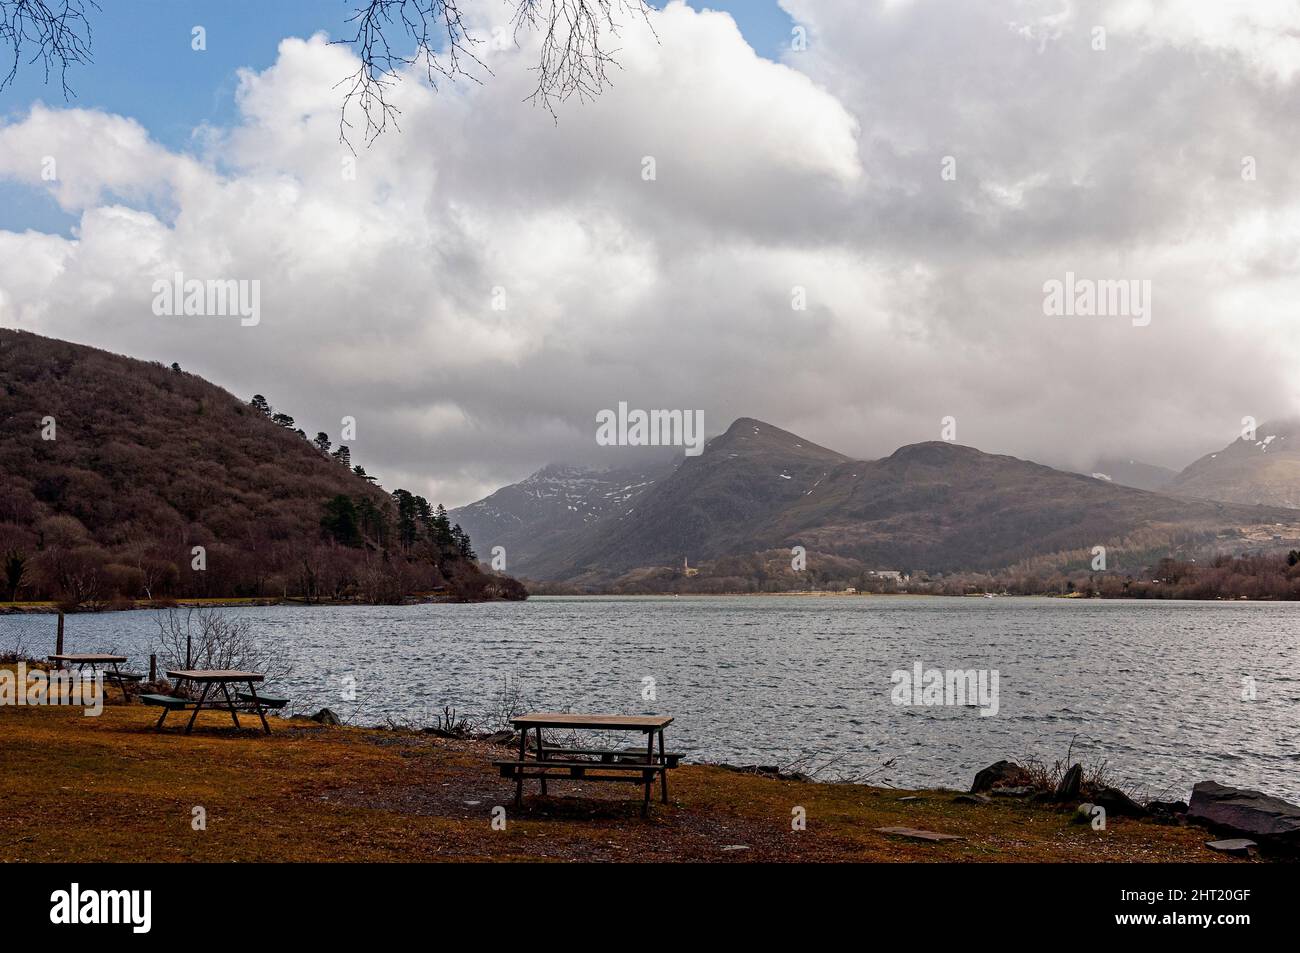 The snow dotted and cloud capped peaks of the rugged, mountains of the Snowdonia National Park as seen from the lakeside picnic area at Cei Llydan Stock Photo